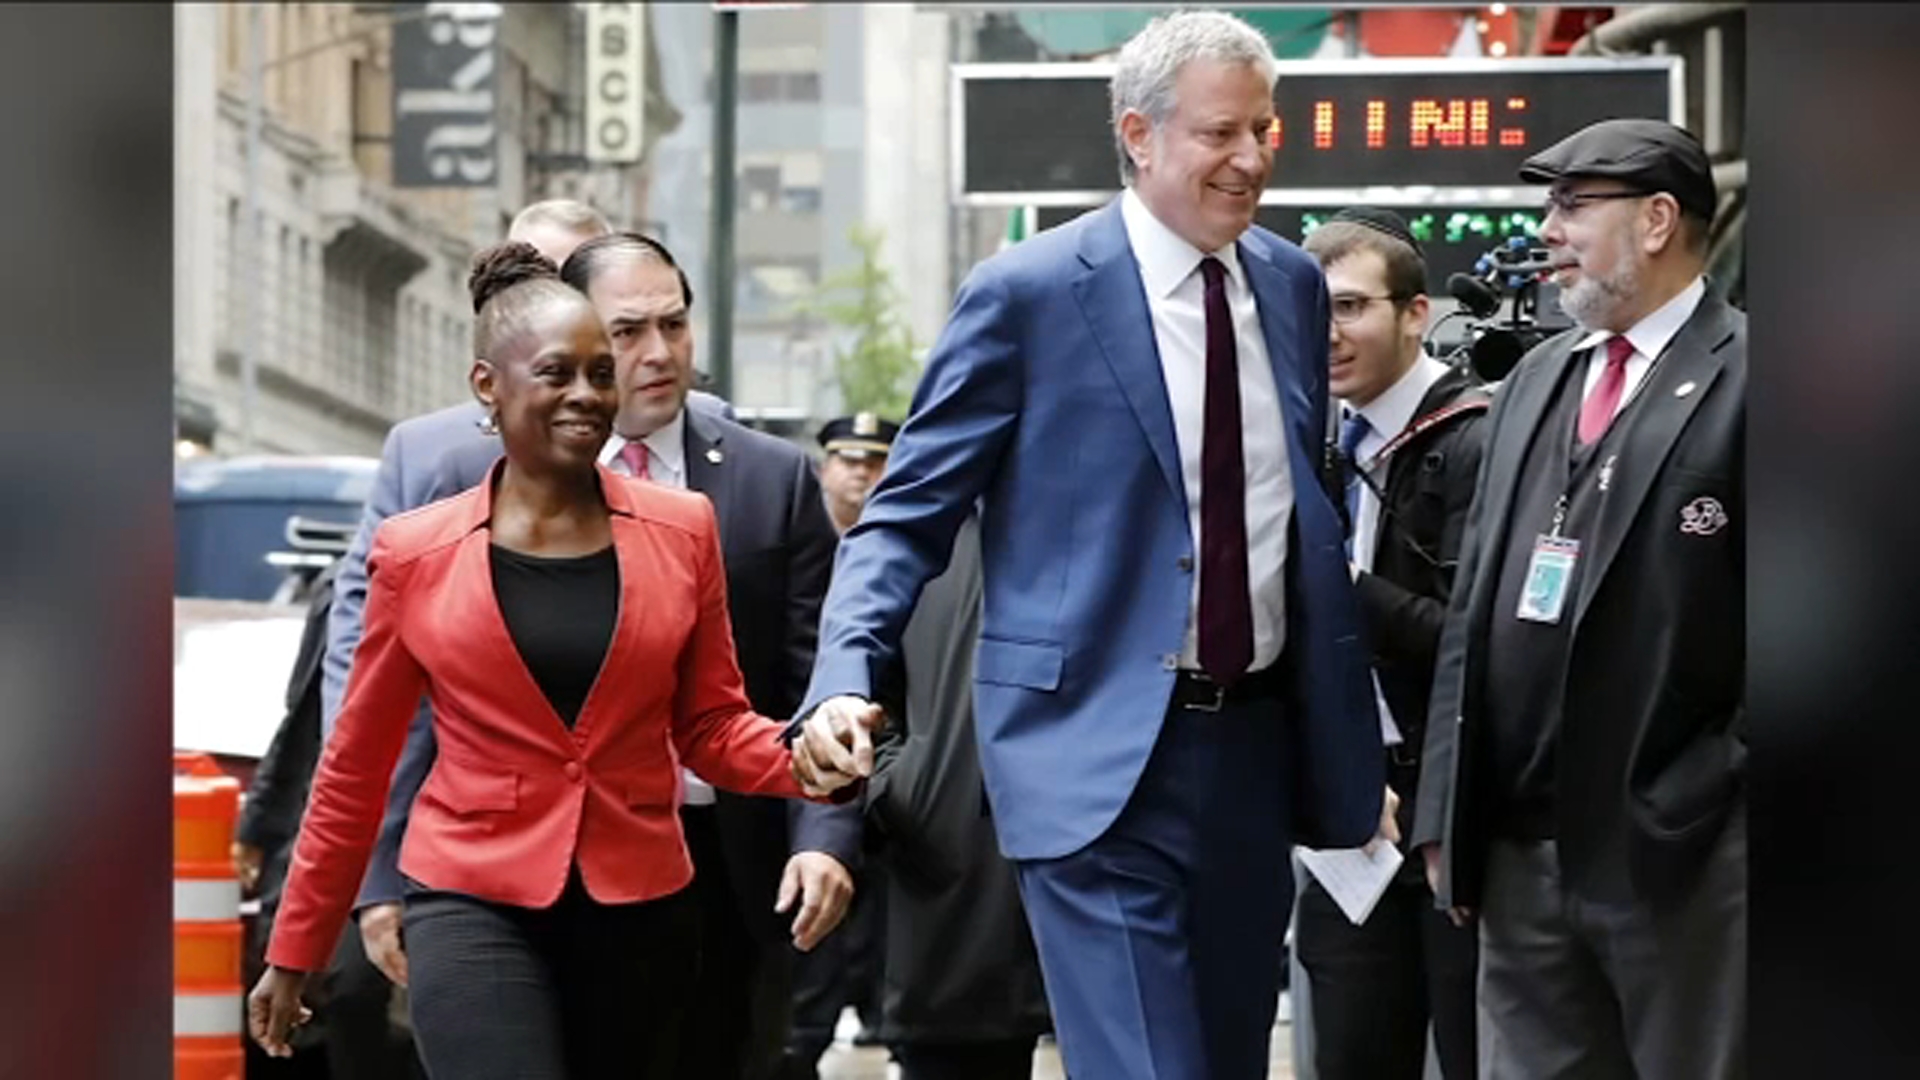 Bill de Blasio and Chirlane McCray announce separation in NY Times interview